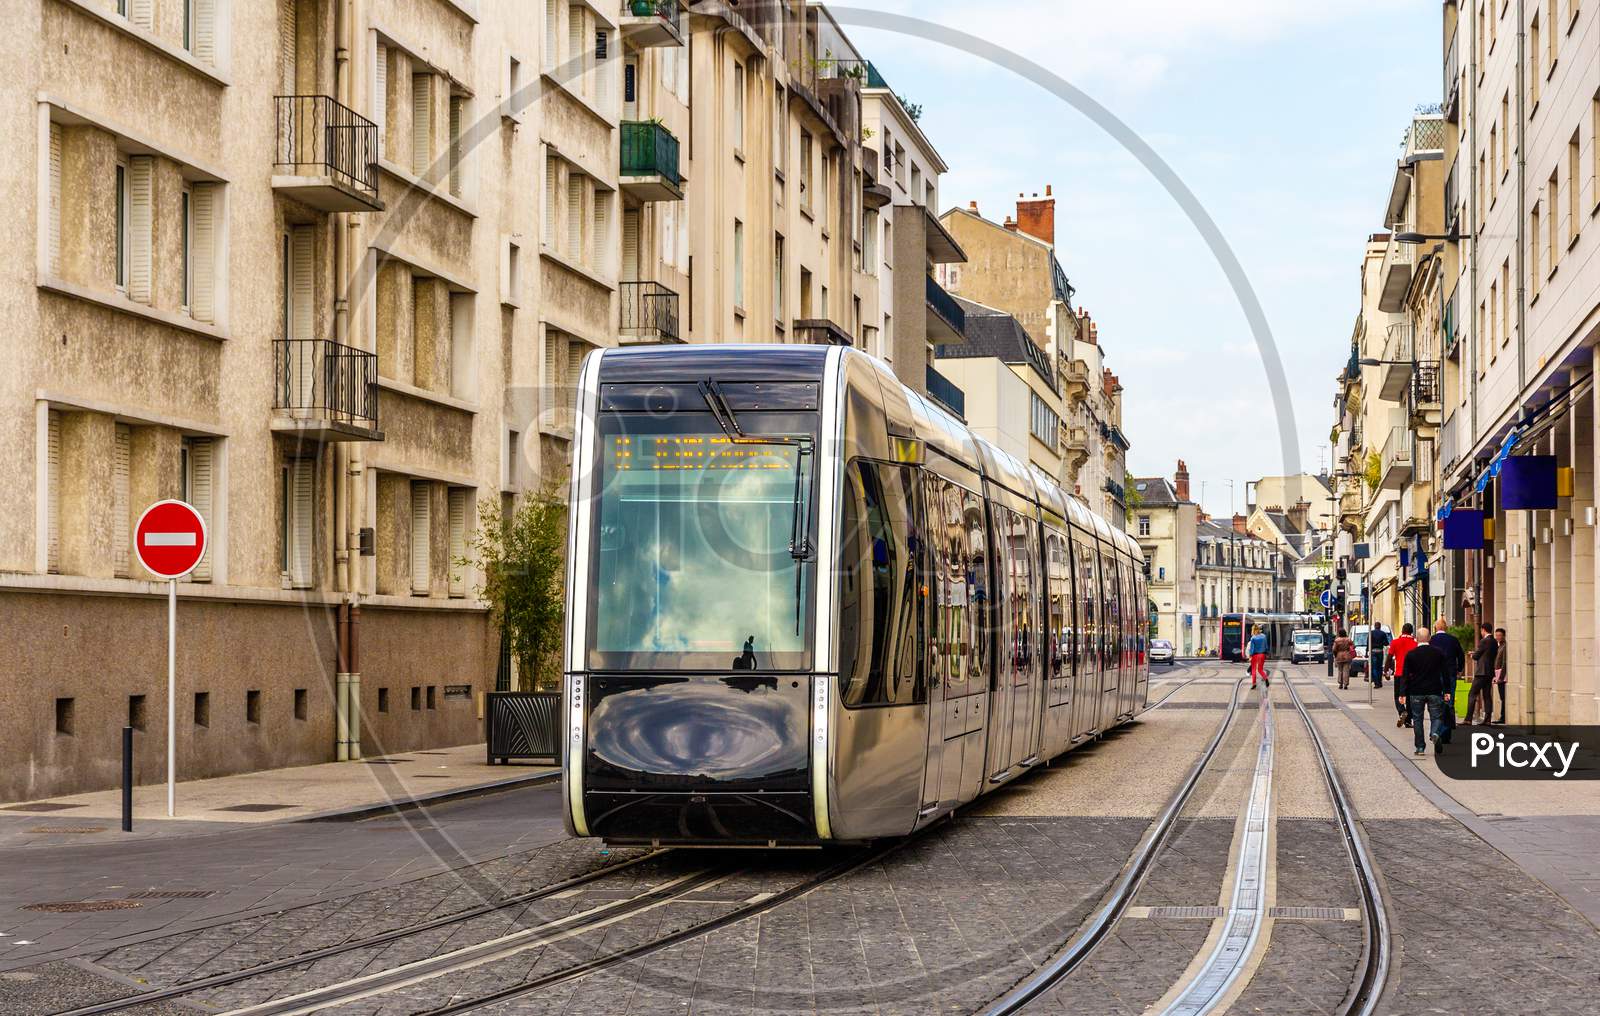 Wireless Tram In The City Centre Of Tours - France